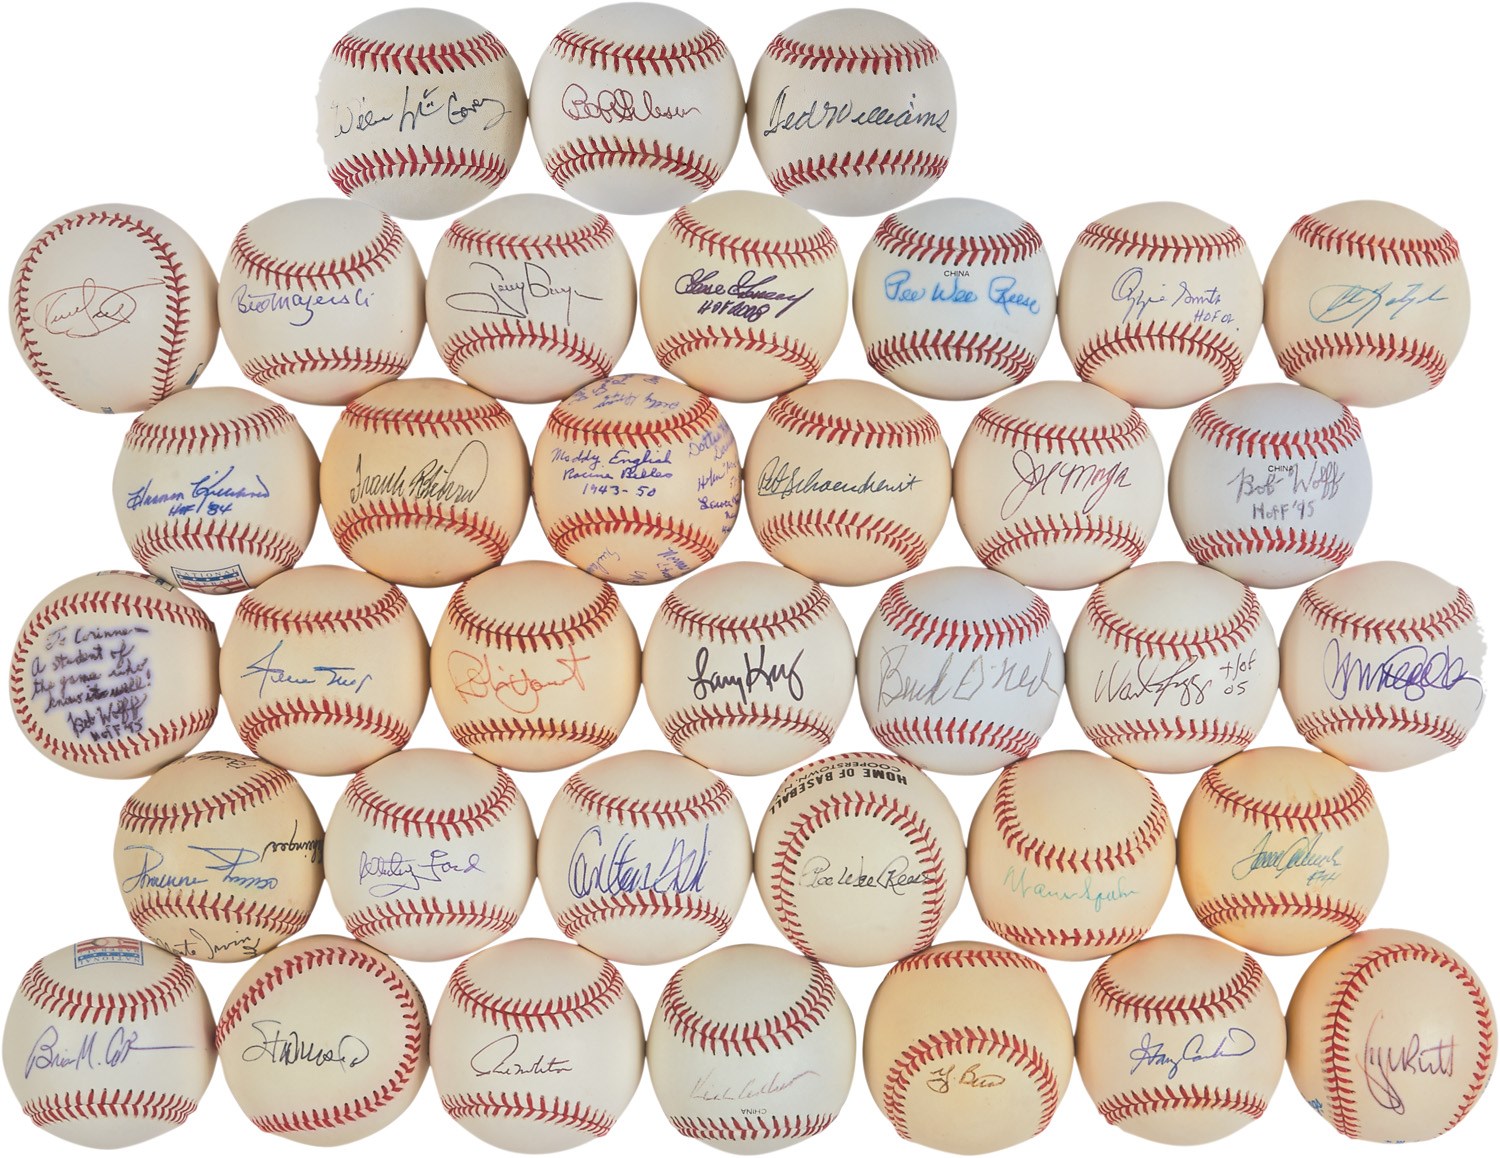 - "Hall of Fame" Single-Signed Baseball Collection from Cooperstown Employee (300+)